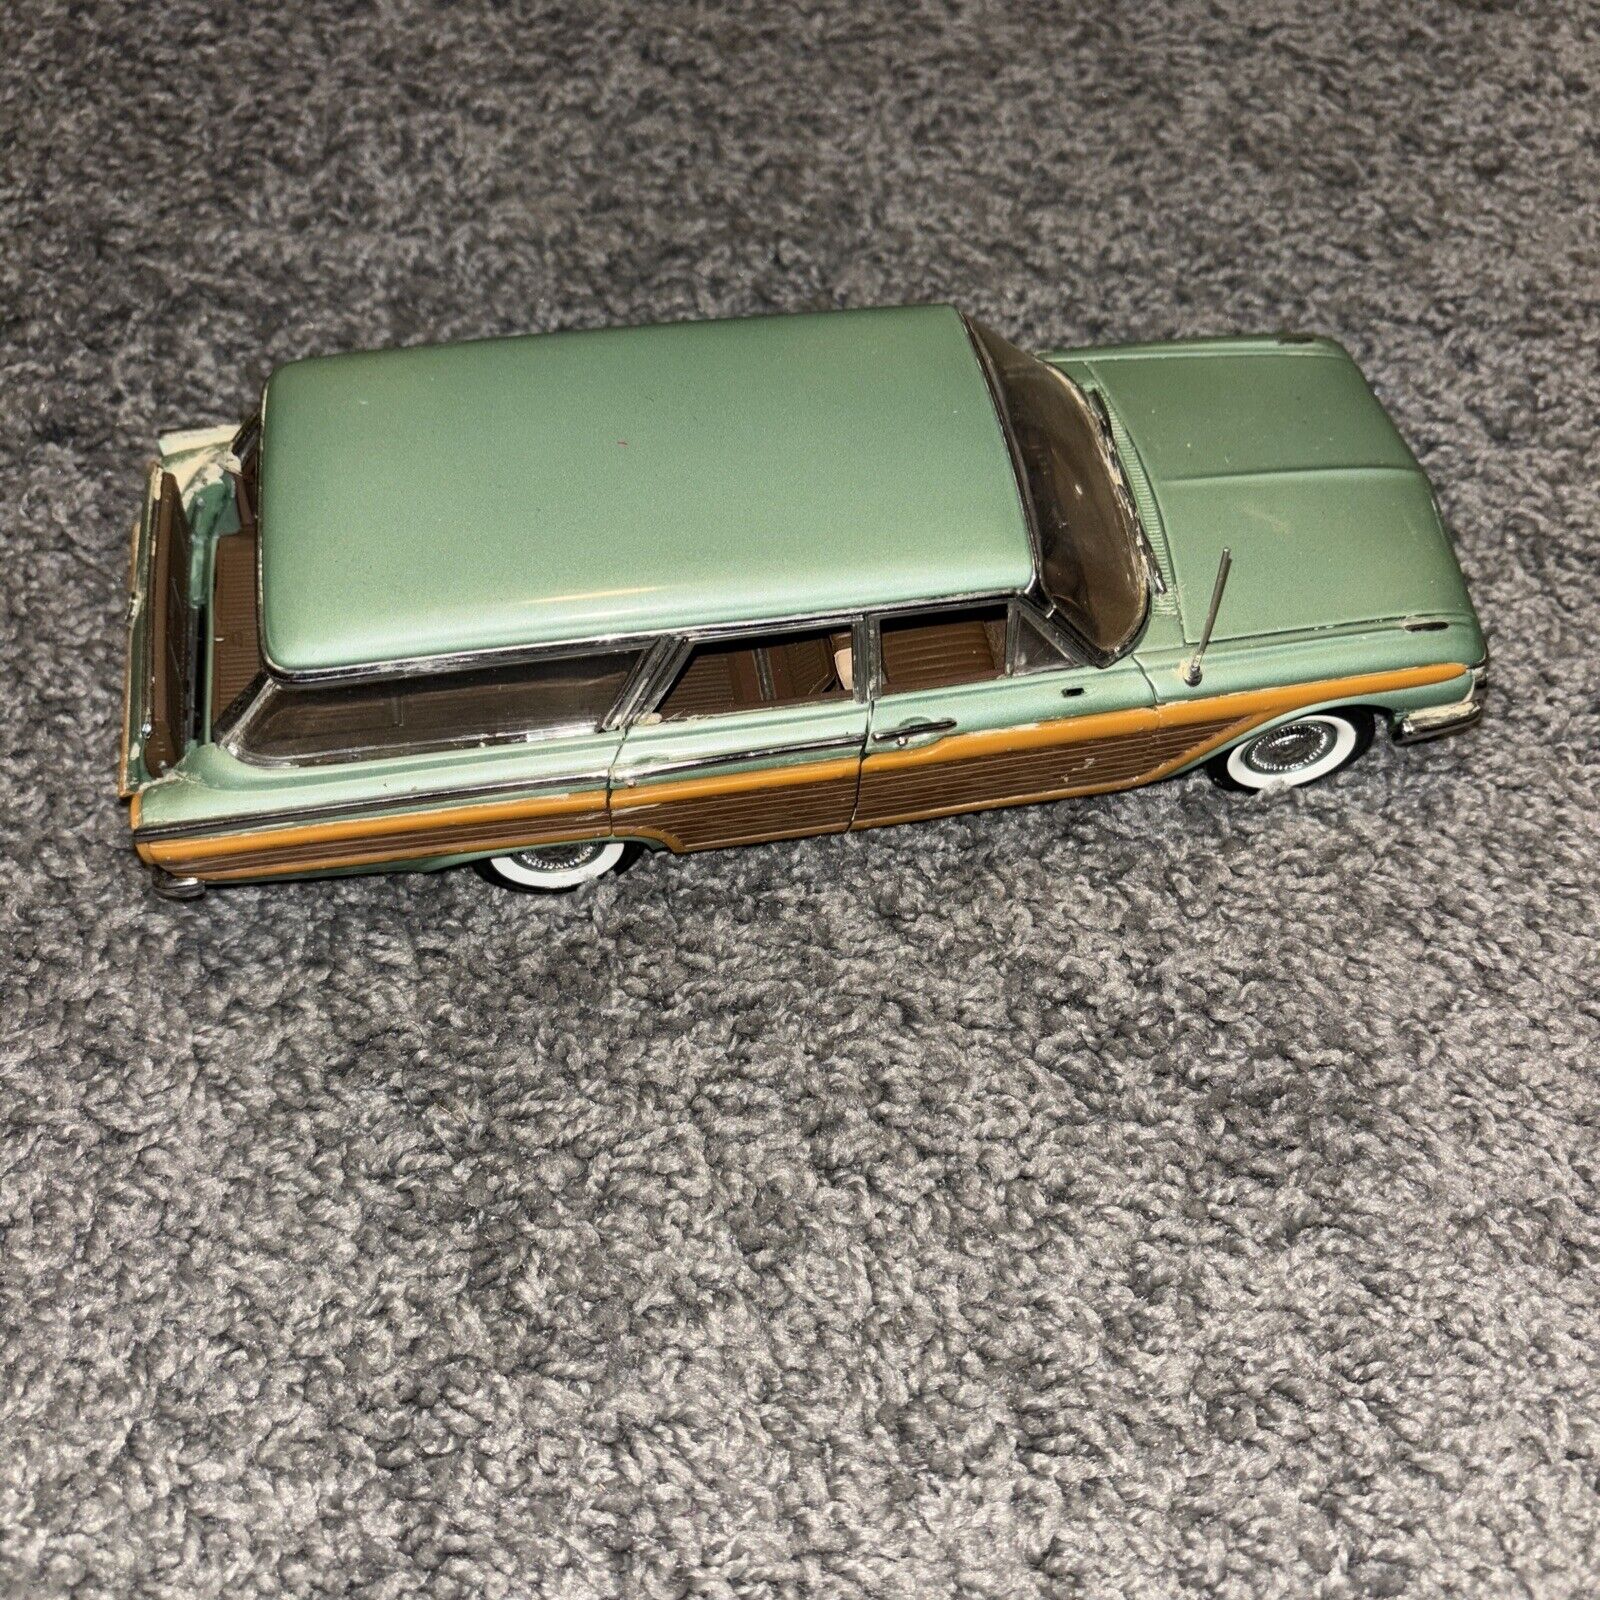 The Franklin Mint 1961 Ford Country Squire.